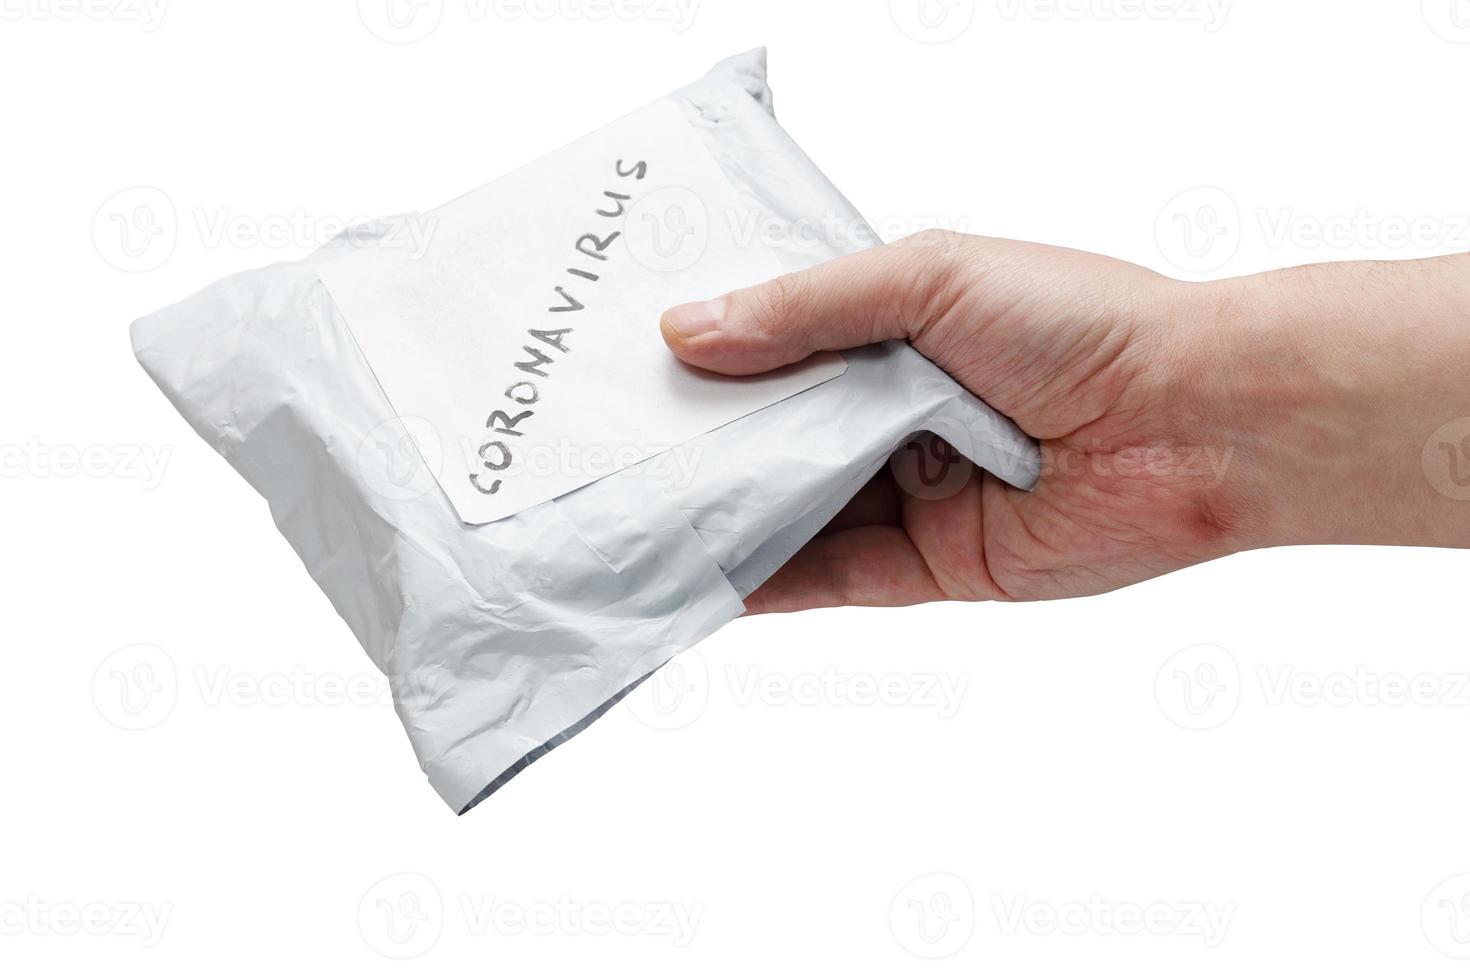 a hand giving small packet parcel from china with label coronavirus on it - isolated on white background photo